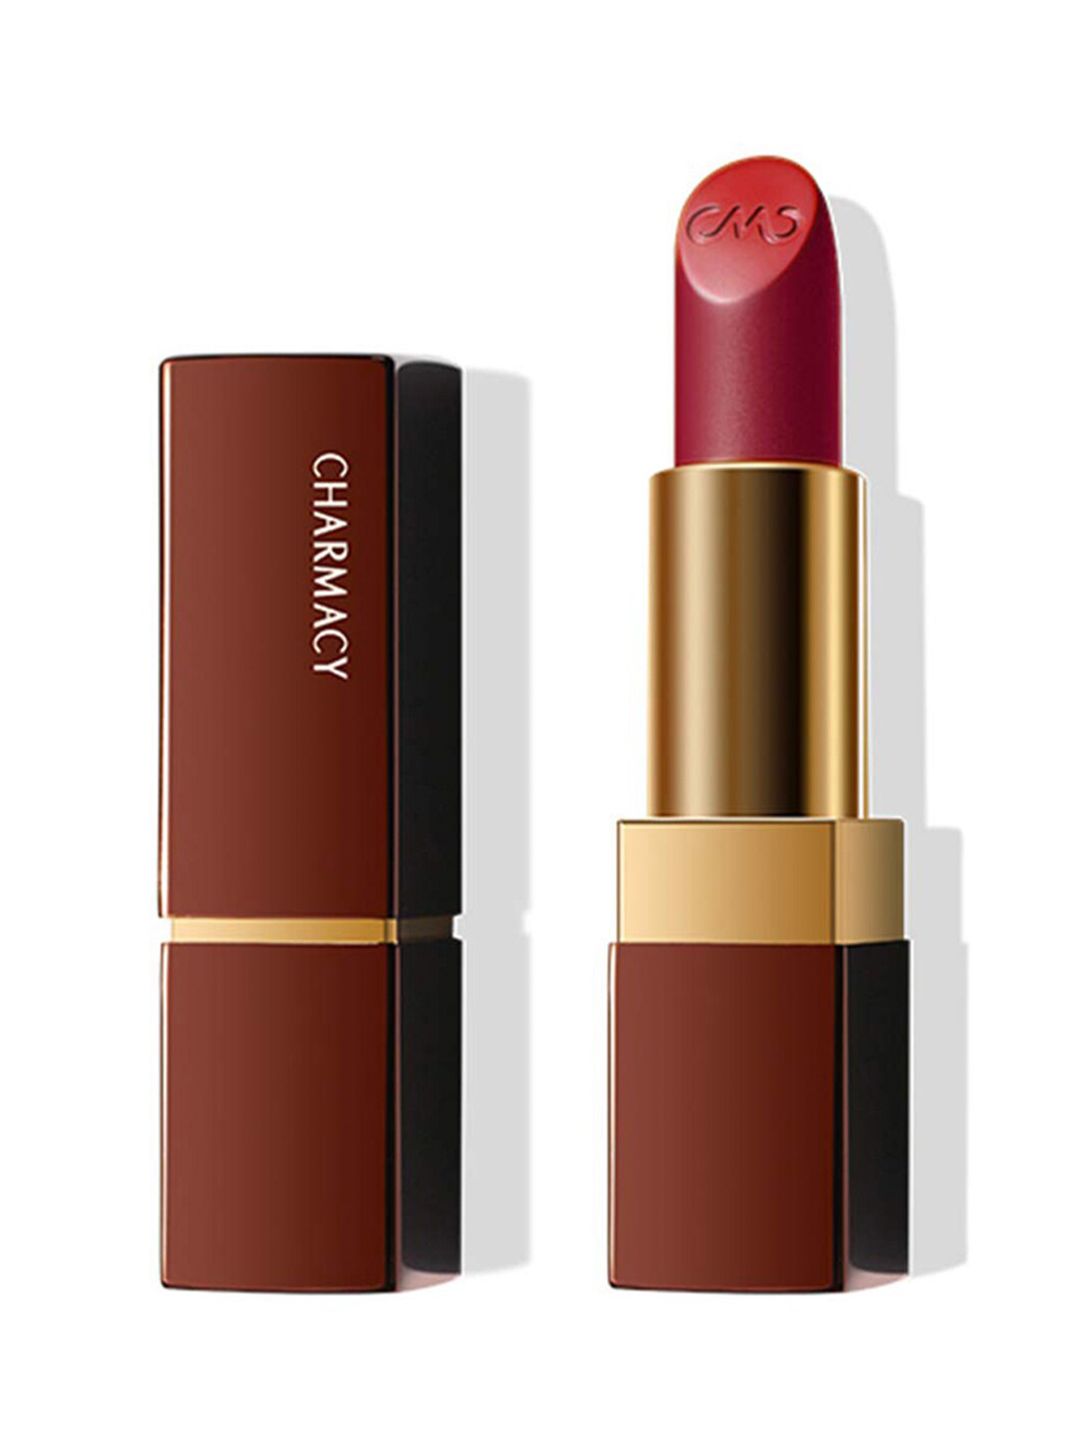 Charmacy Milano Soft Satin Matte Lipstick - Fiery Rose 53 Price in India